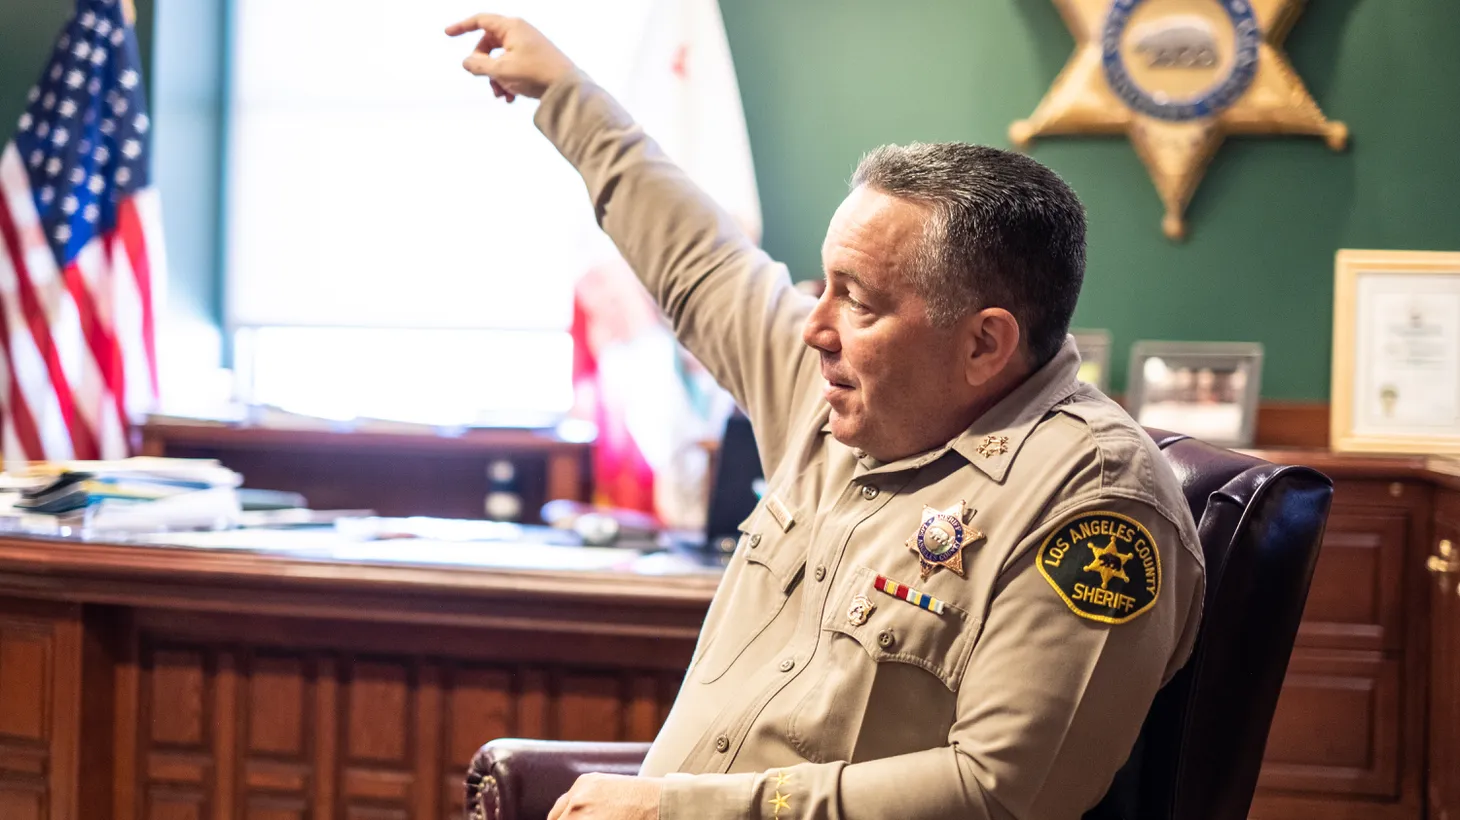 LA County Sheriff Alex Villanueva is dominating conversations surrounding the sheriff’s race by maximizing his name recognition.